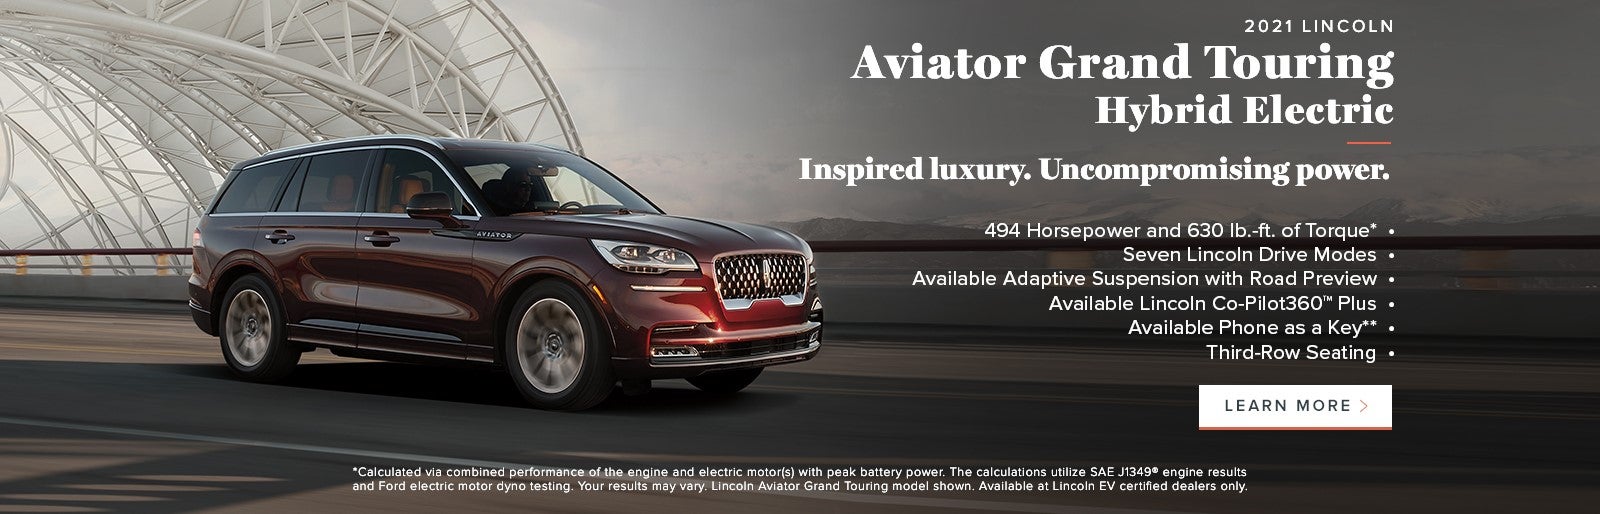 2021 Lincoln Aviator Grand Touring Hybrid Electric 